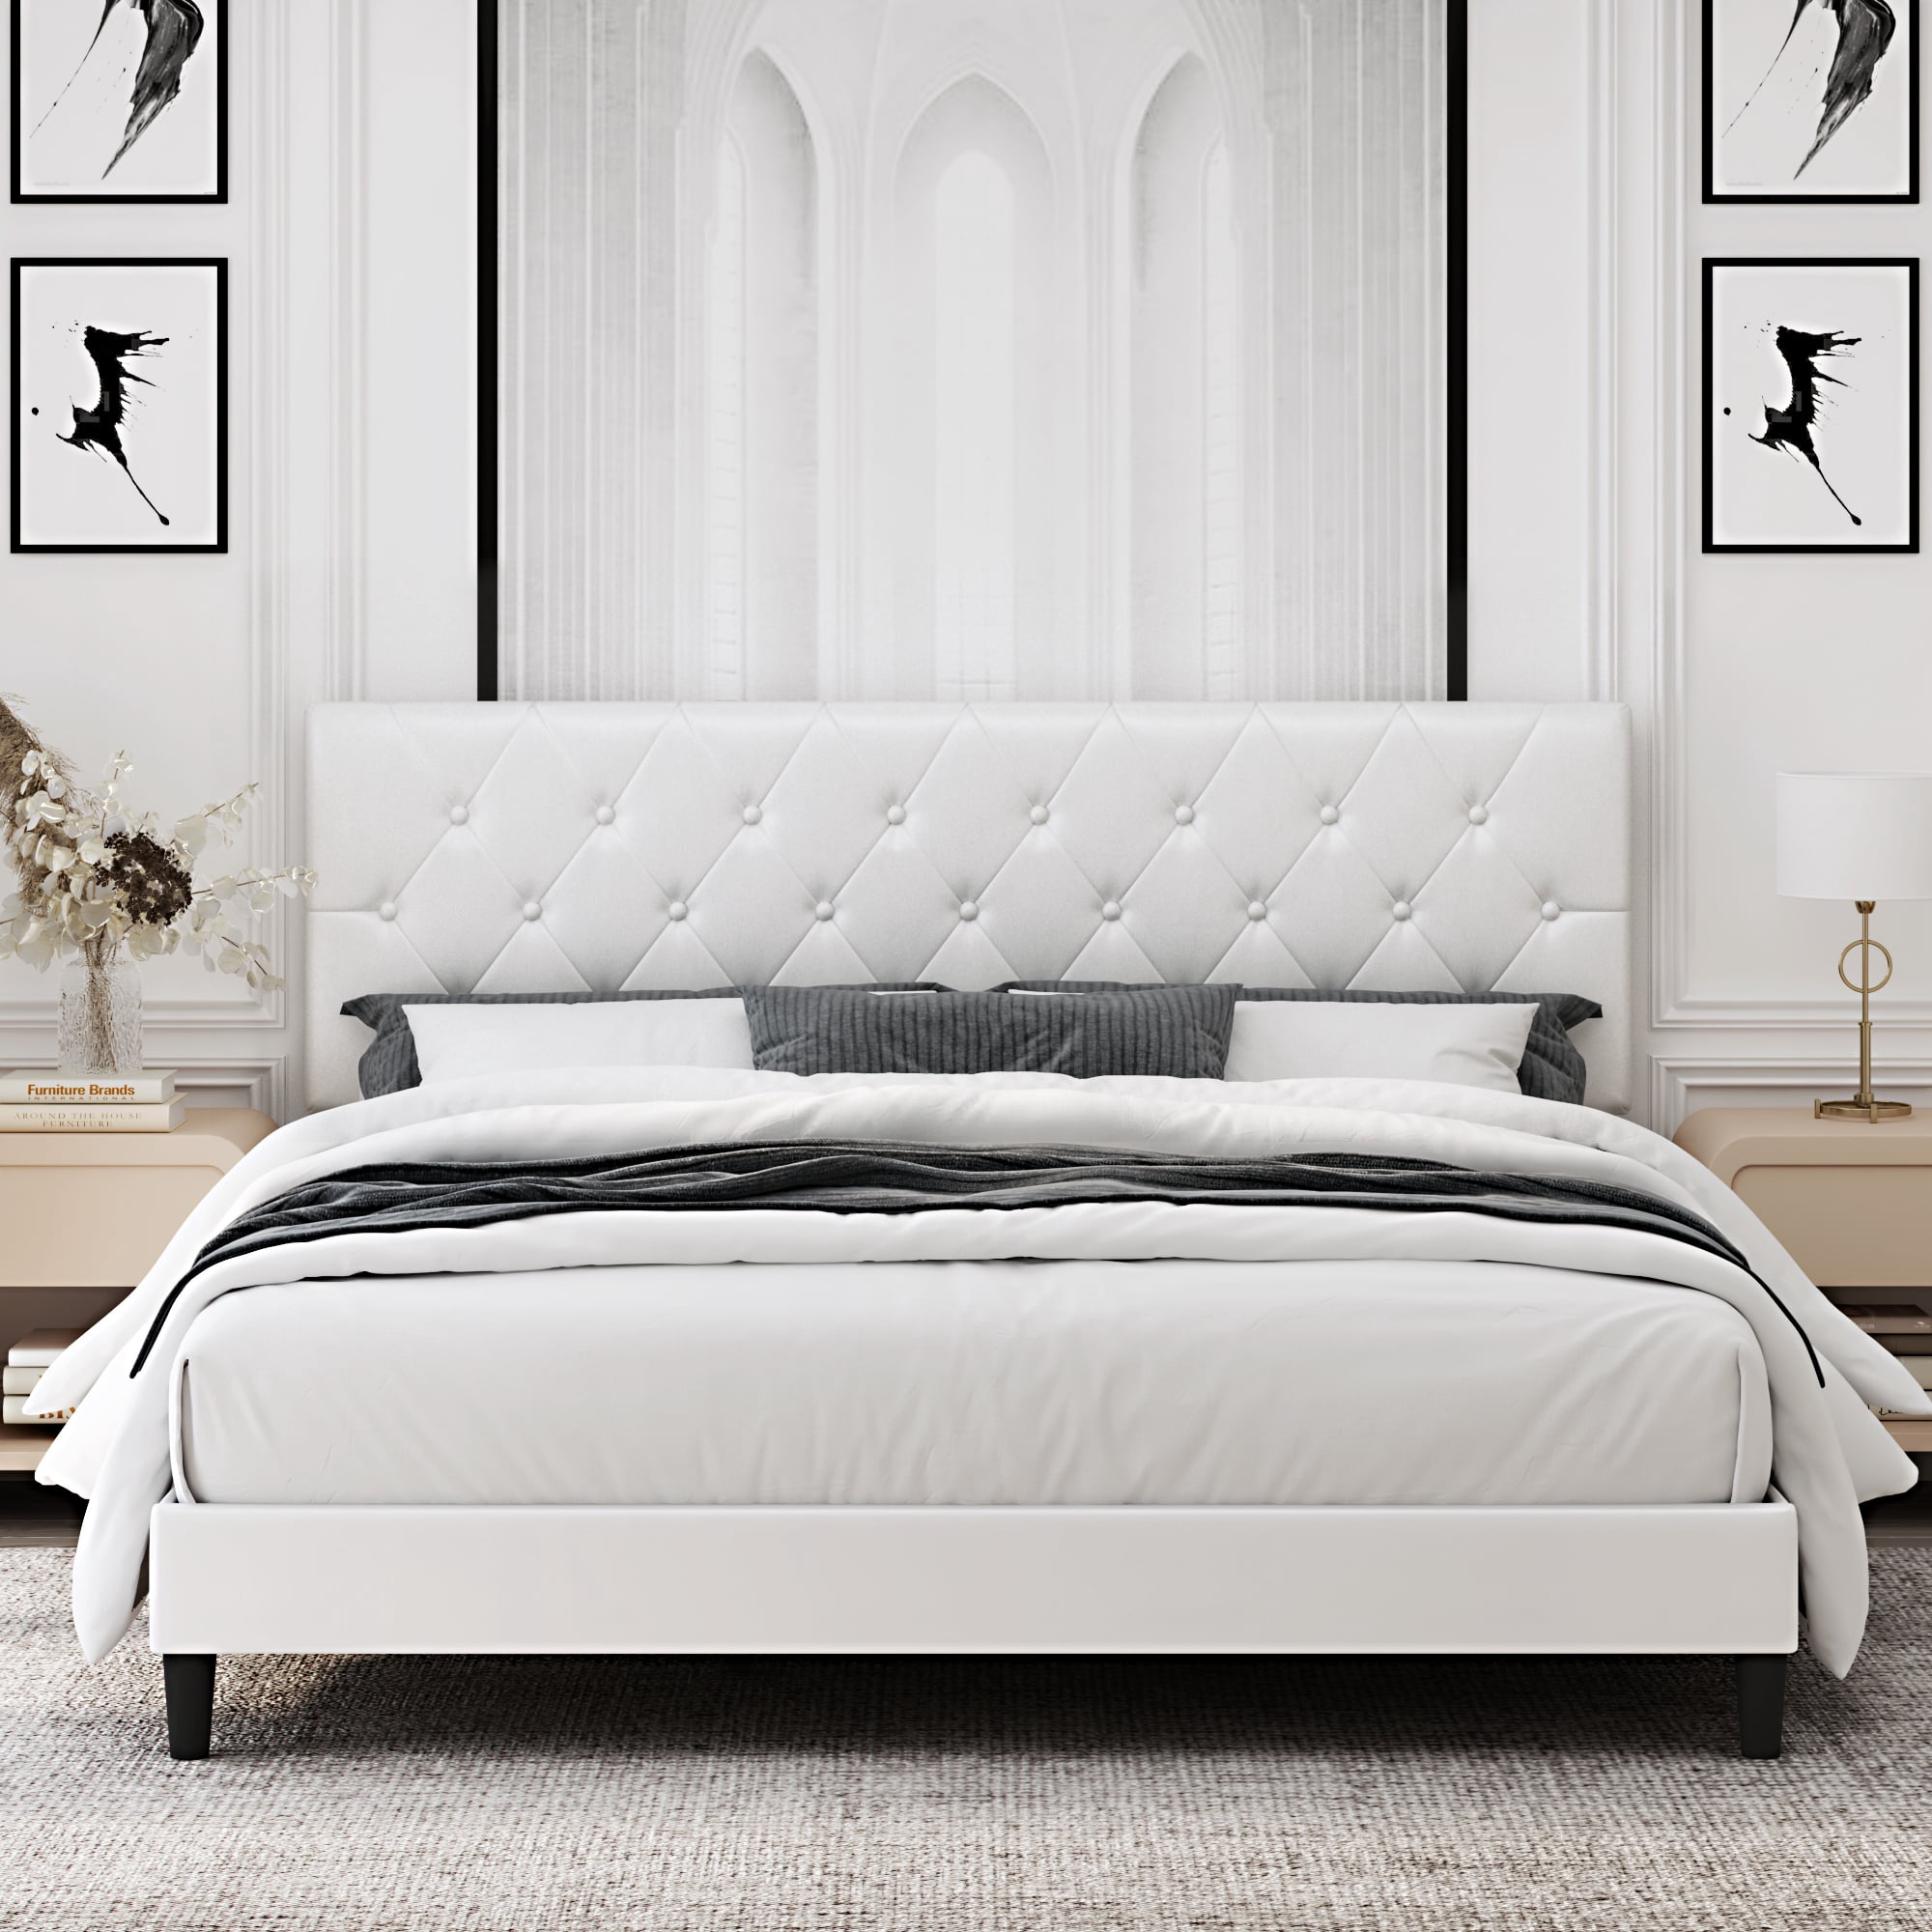 Homfa White Faux Leather Upholstered Button Tufted Platform bed with Adjustable Headboard